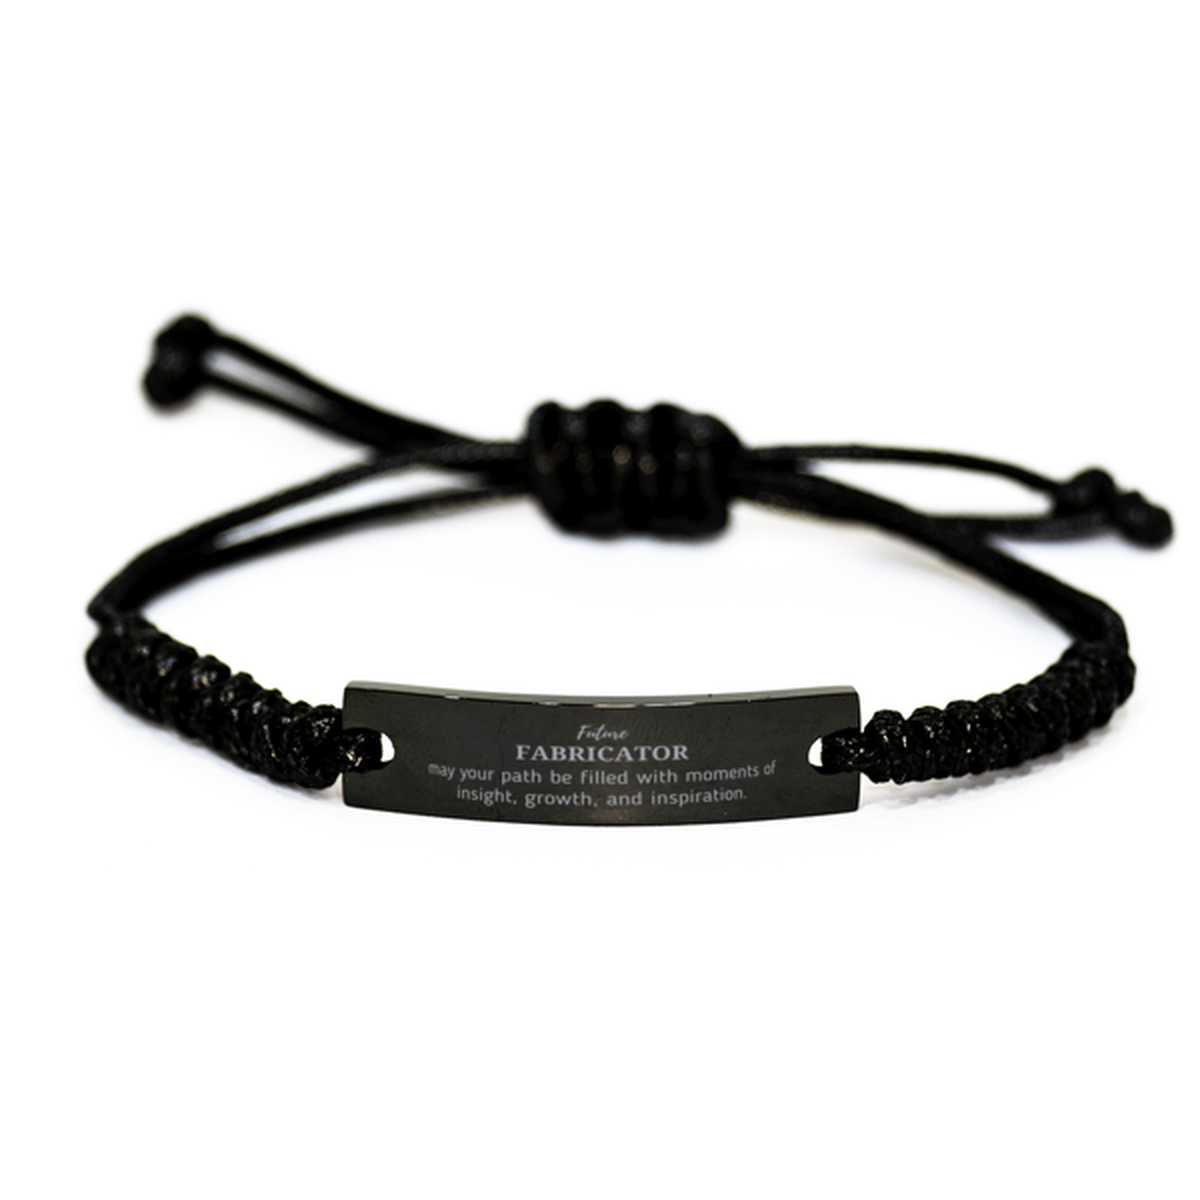 Future Fabricator Gifts, May your path be filled with moments of insight, Graduation Gifts for New Fabricator, Christmas Unique Black Rope Bracelet For Men, Women, Friends